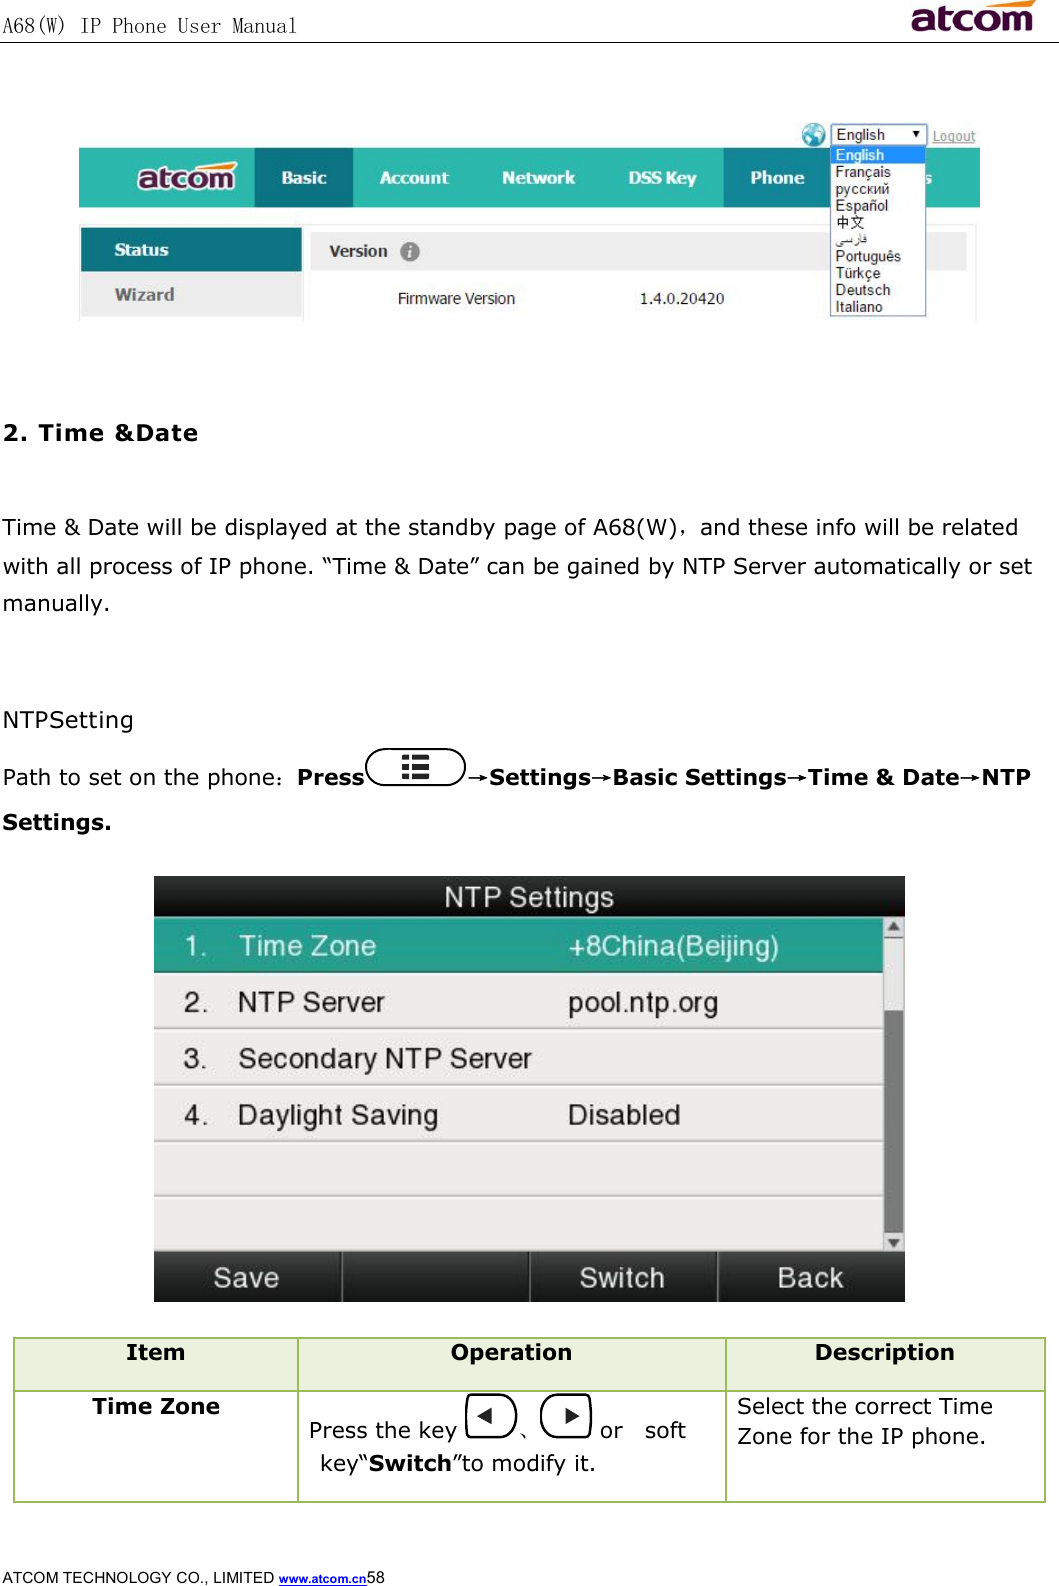 A68(W) IP Phone User Manual                                                           ATCOM TECHNOLOGY CO., LIMITED www.atcom.cn58     2. Time &amp;Date  Time &amp; Date will be displayed at the standby page of A68(W)，and these info will be related with all process of IP phone. “Time &amp; Date” can be gained by NTP Server automatically or set manually.   NTPSetting Path to set on the phone：Press →Settings→Basic Settings→Time &amp; Date→NTP Settings.  Item  Operation  Description Time Zone Press the key  、 or soft key“Switch”to modify it. Select the correct Time Zone for the IP phone. 